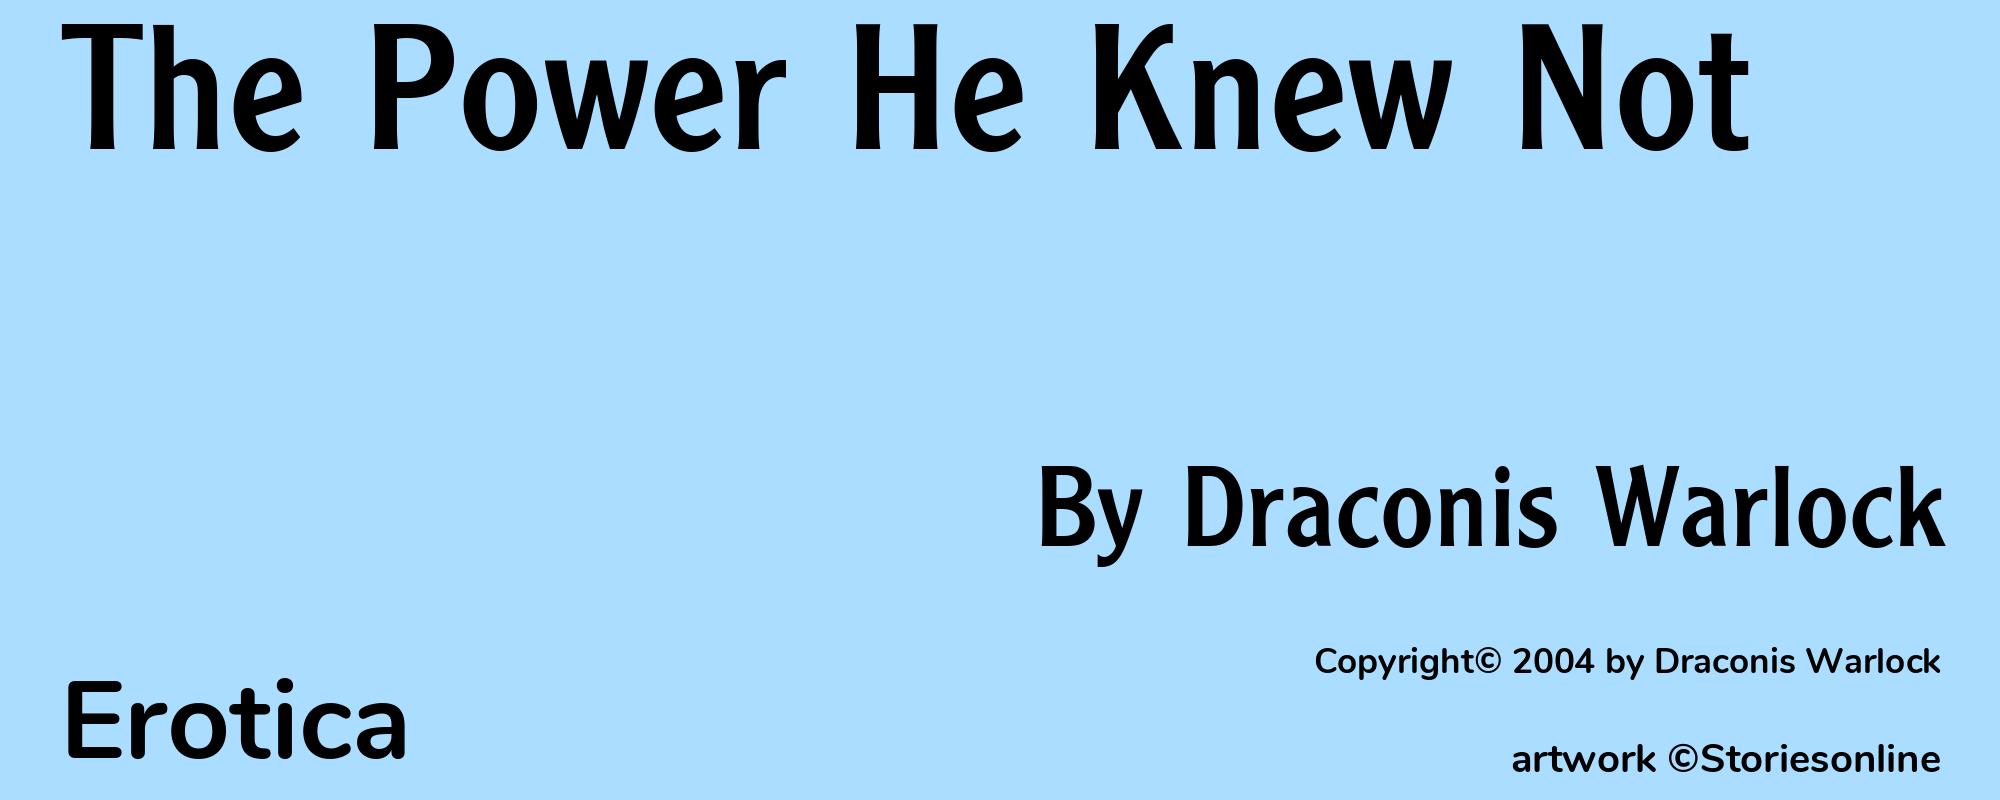 The Power He Knew Not - Cover